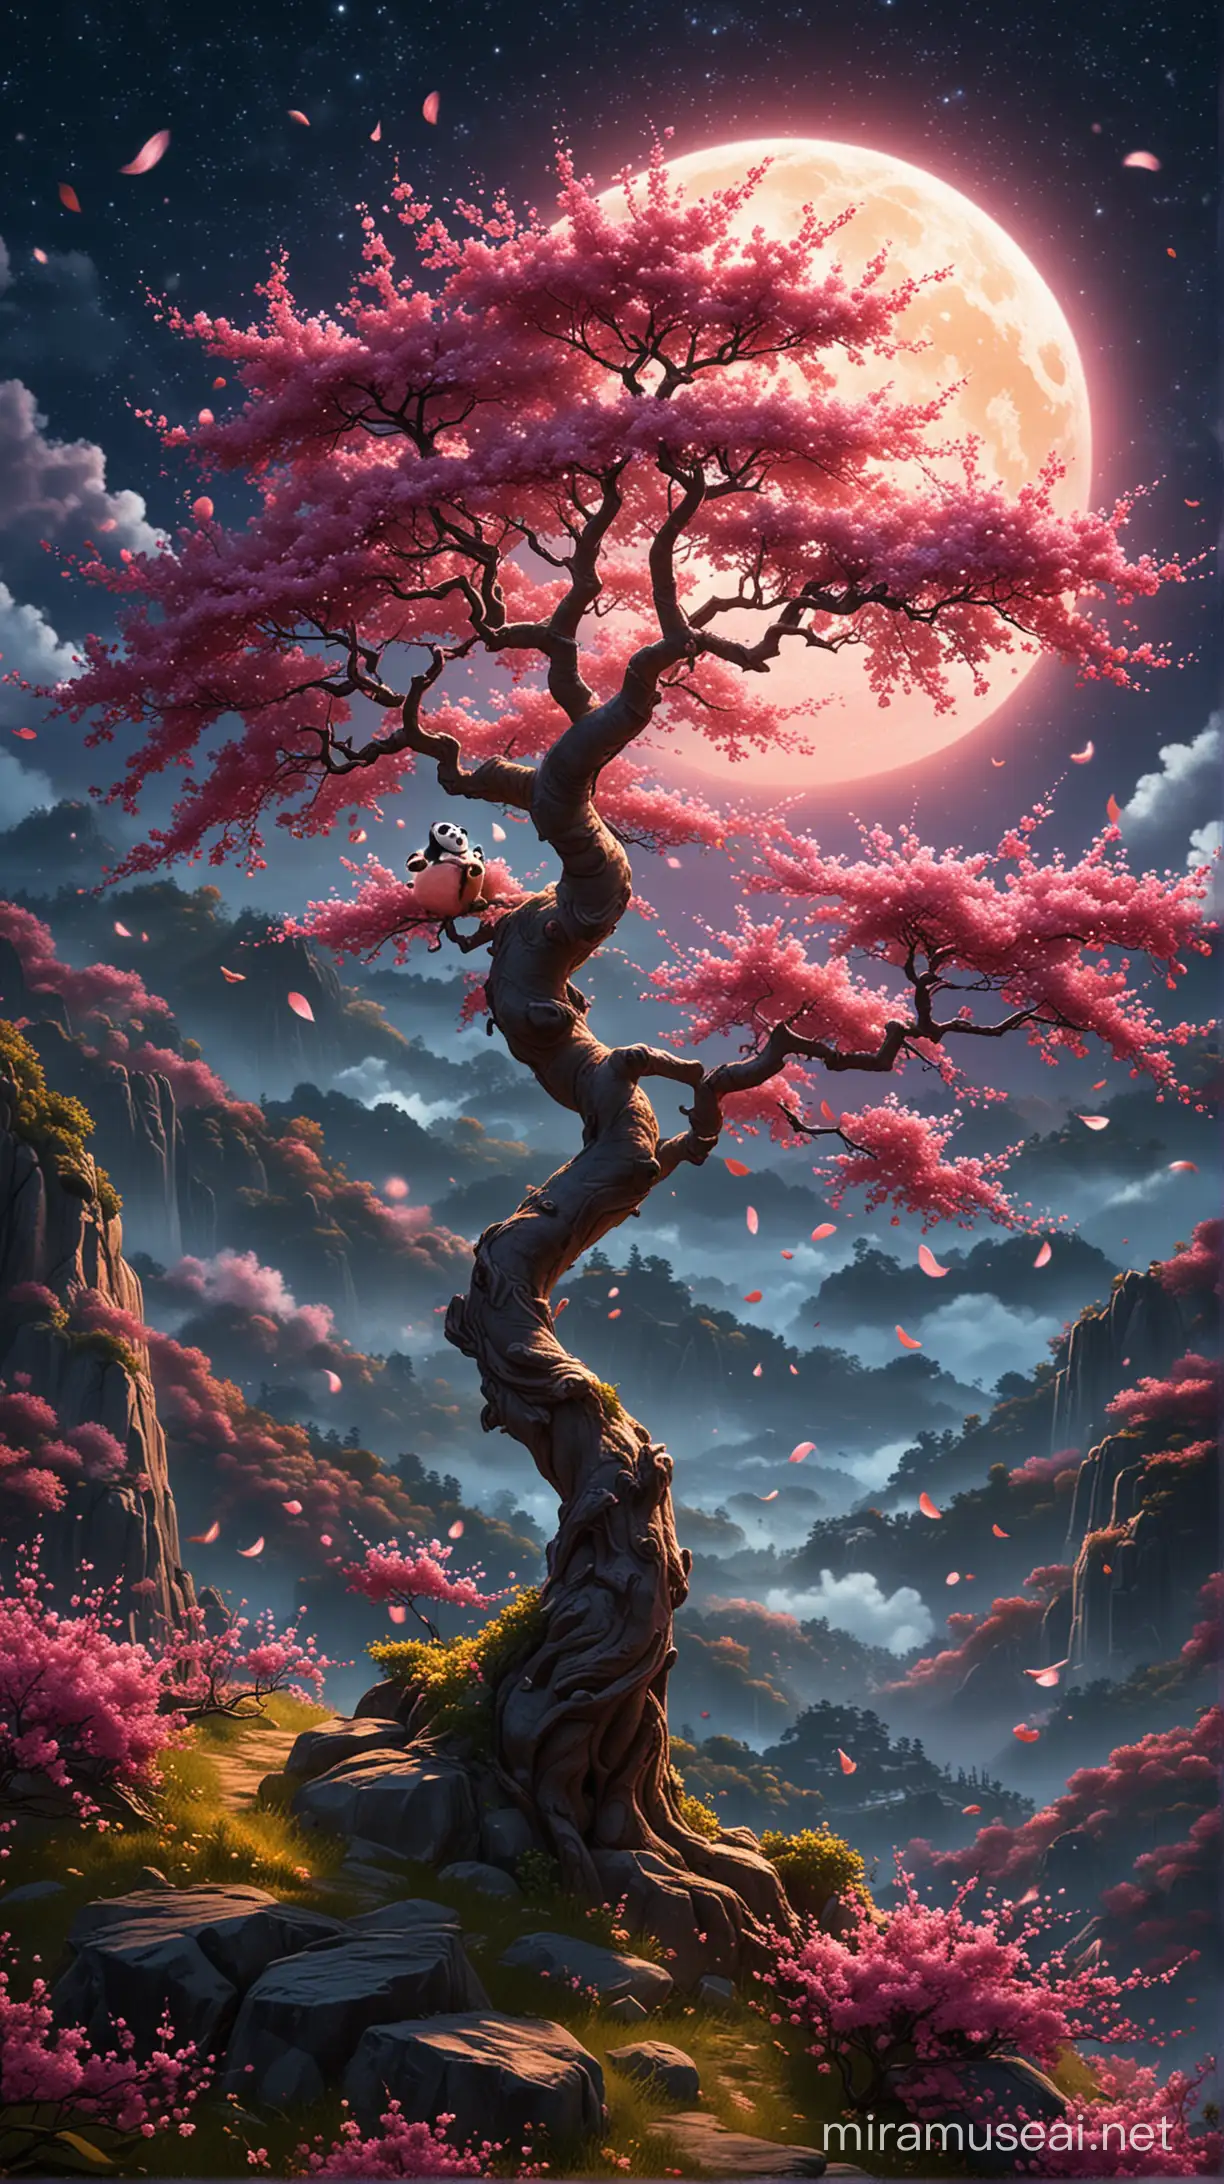 Picture a mystical peach tree radiating with vibrant colors atop a secluded mountain peak, under the cover of night. The tree is aglow with life, its leaves a lush green and its blossoms a vivid pink, despite the darkness. A full moon hangs high in the sky, its light diffused through a thin veil of clouds, casting a soft, ethereal luminescence that reveals the tree in all its glory. The stars twinkle in the background, adding a sprinkle of celestial magic to the scene. This is the Peach Tree of Heavenly Wisdom from Kung Fu Panda, a symbol of enduring spirit and beauty, glowing resplendently in the quiet of the night, offering a wallpaper that is both peaceful and full of life.
